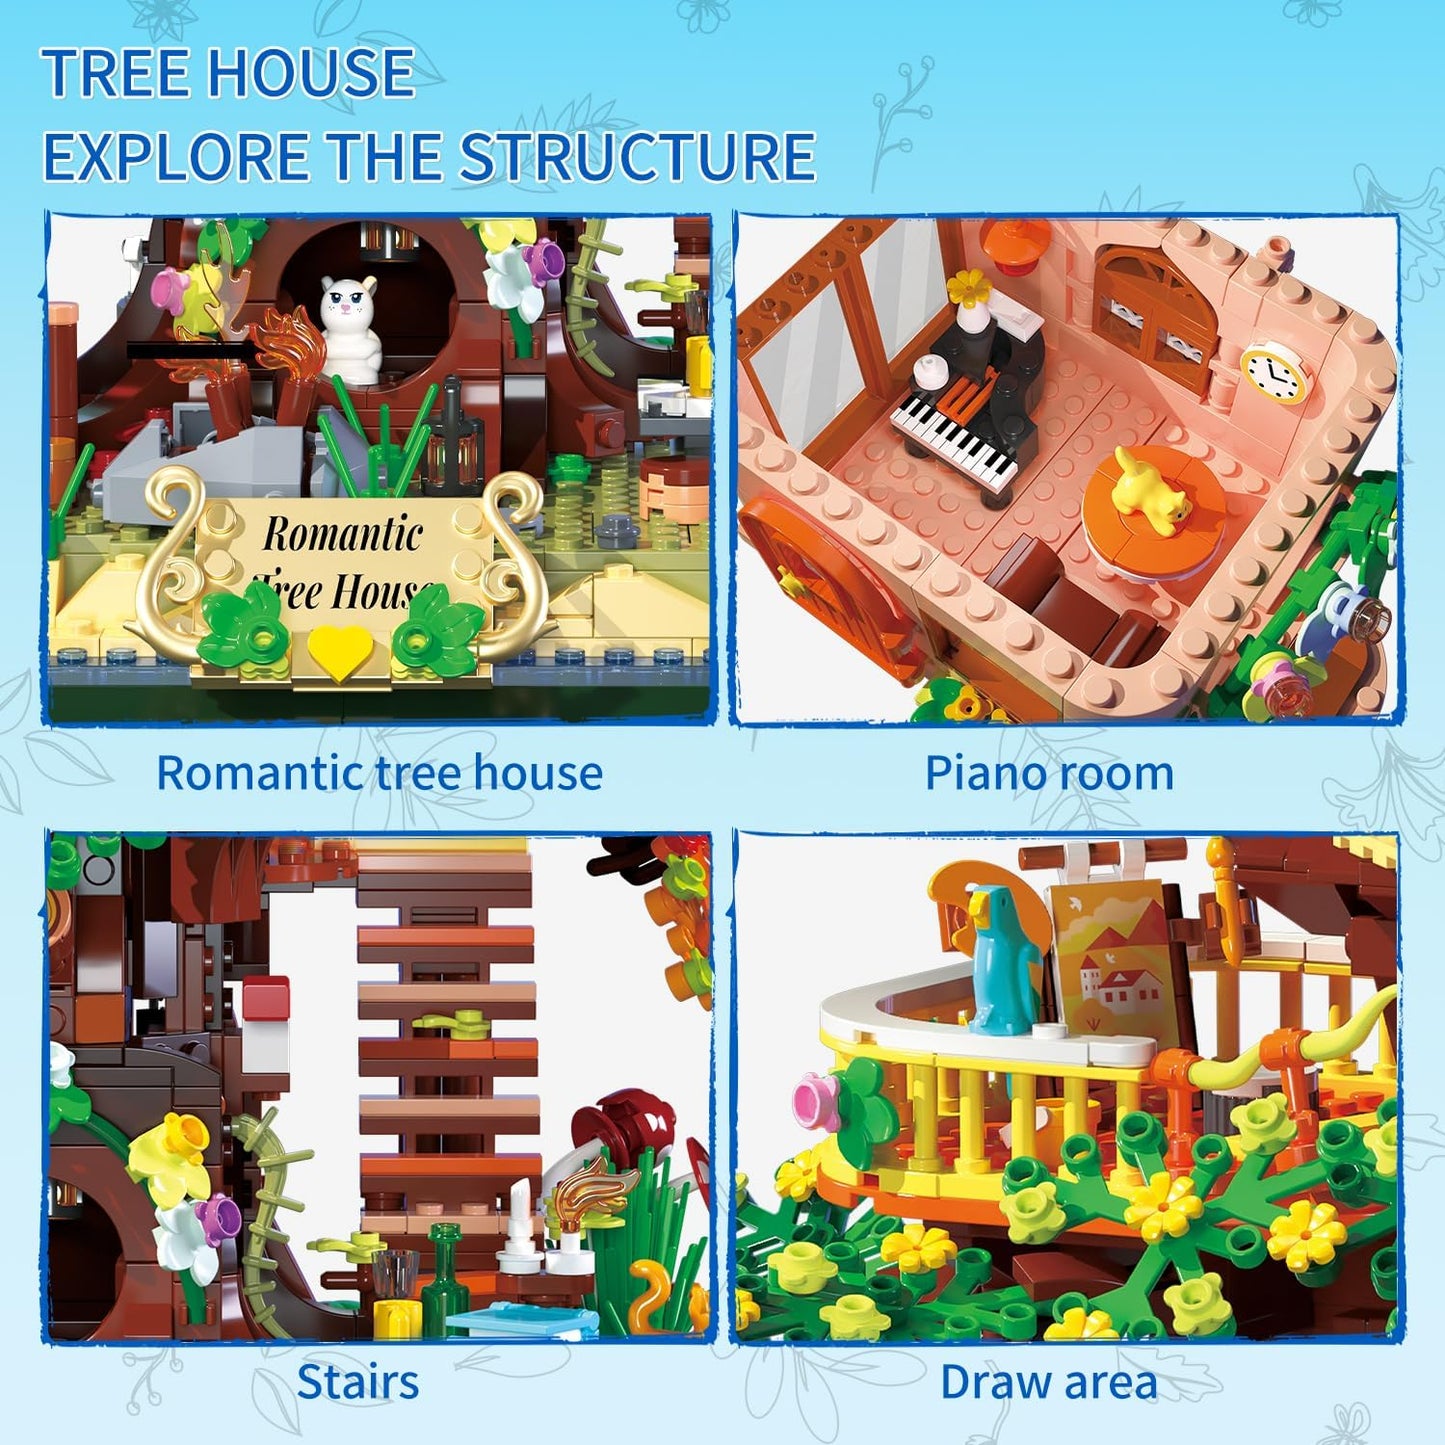 2 in 1 Tree House Building Block, 3196PCS Mini Building Sets, Not Compatible with Lego Treehouse, Model Construction Set for 14 Plus Year Olds & Adults